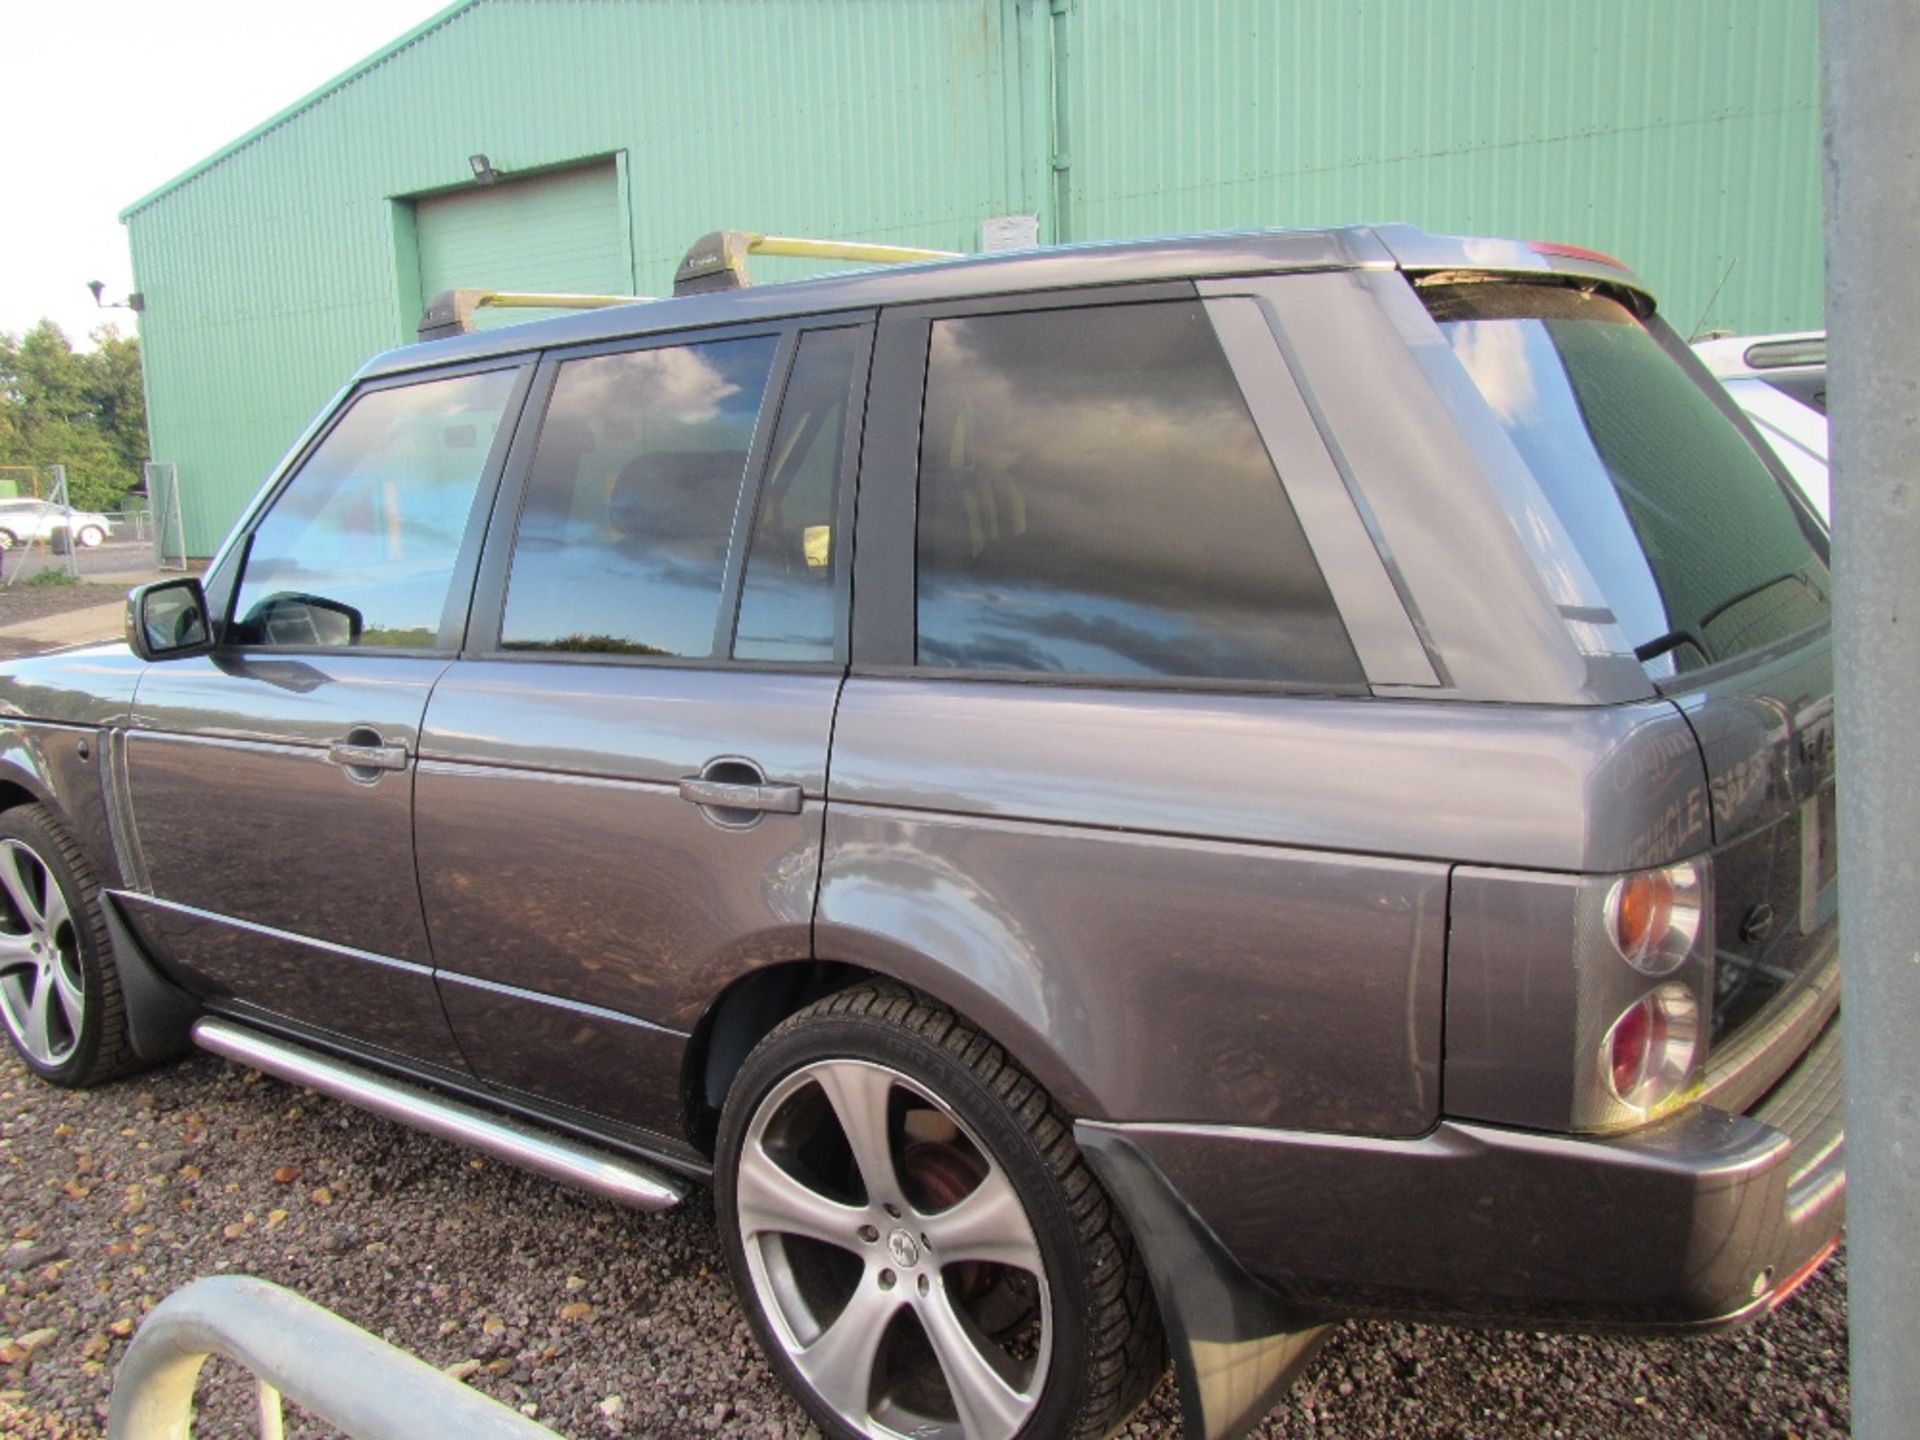 Range Rover Vogue TD6 Project Kahn Diesel 2926cc. No Registration Plates on as transferring from - Image 5 of 5